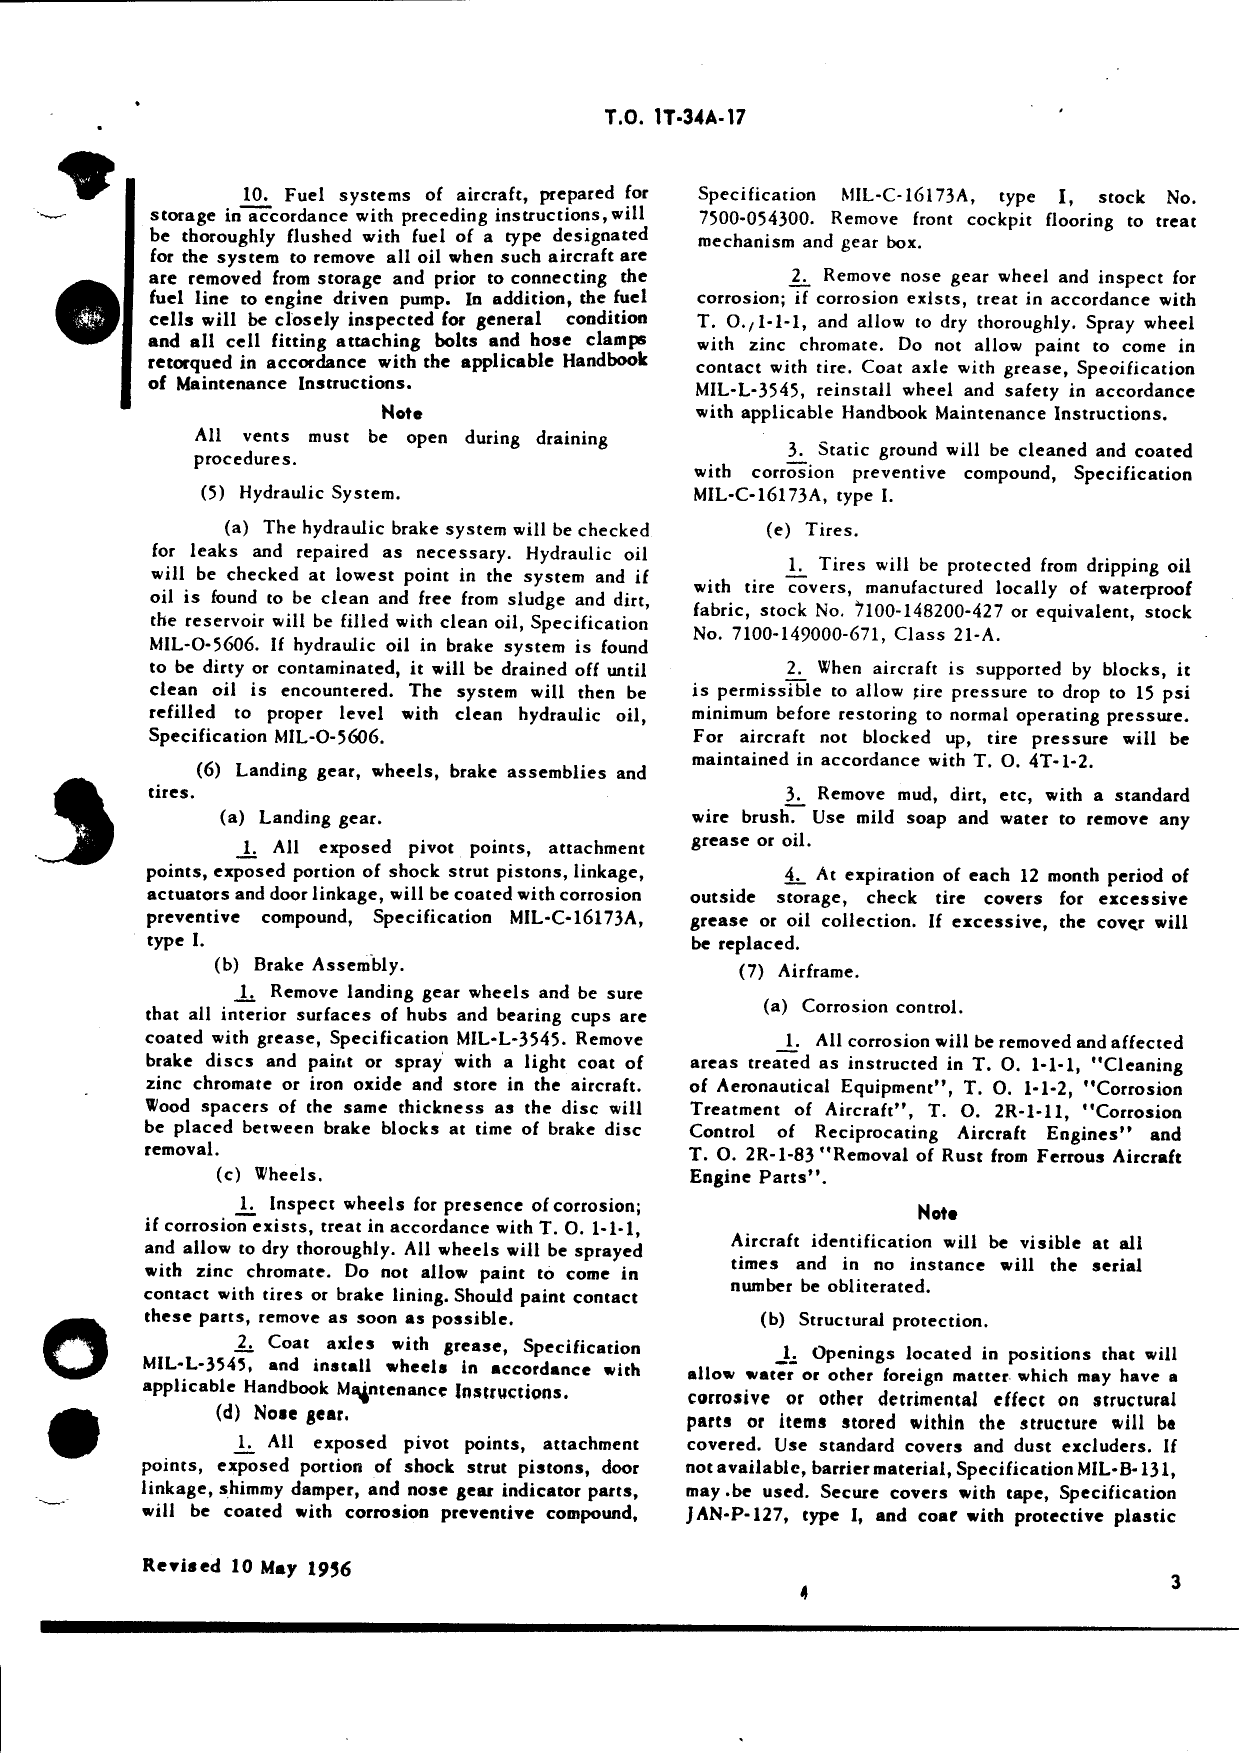 Sample page 5 from AirCorps Library document: Storage Instructions - Storage Instructions of Aircraft T-34 Series